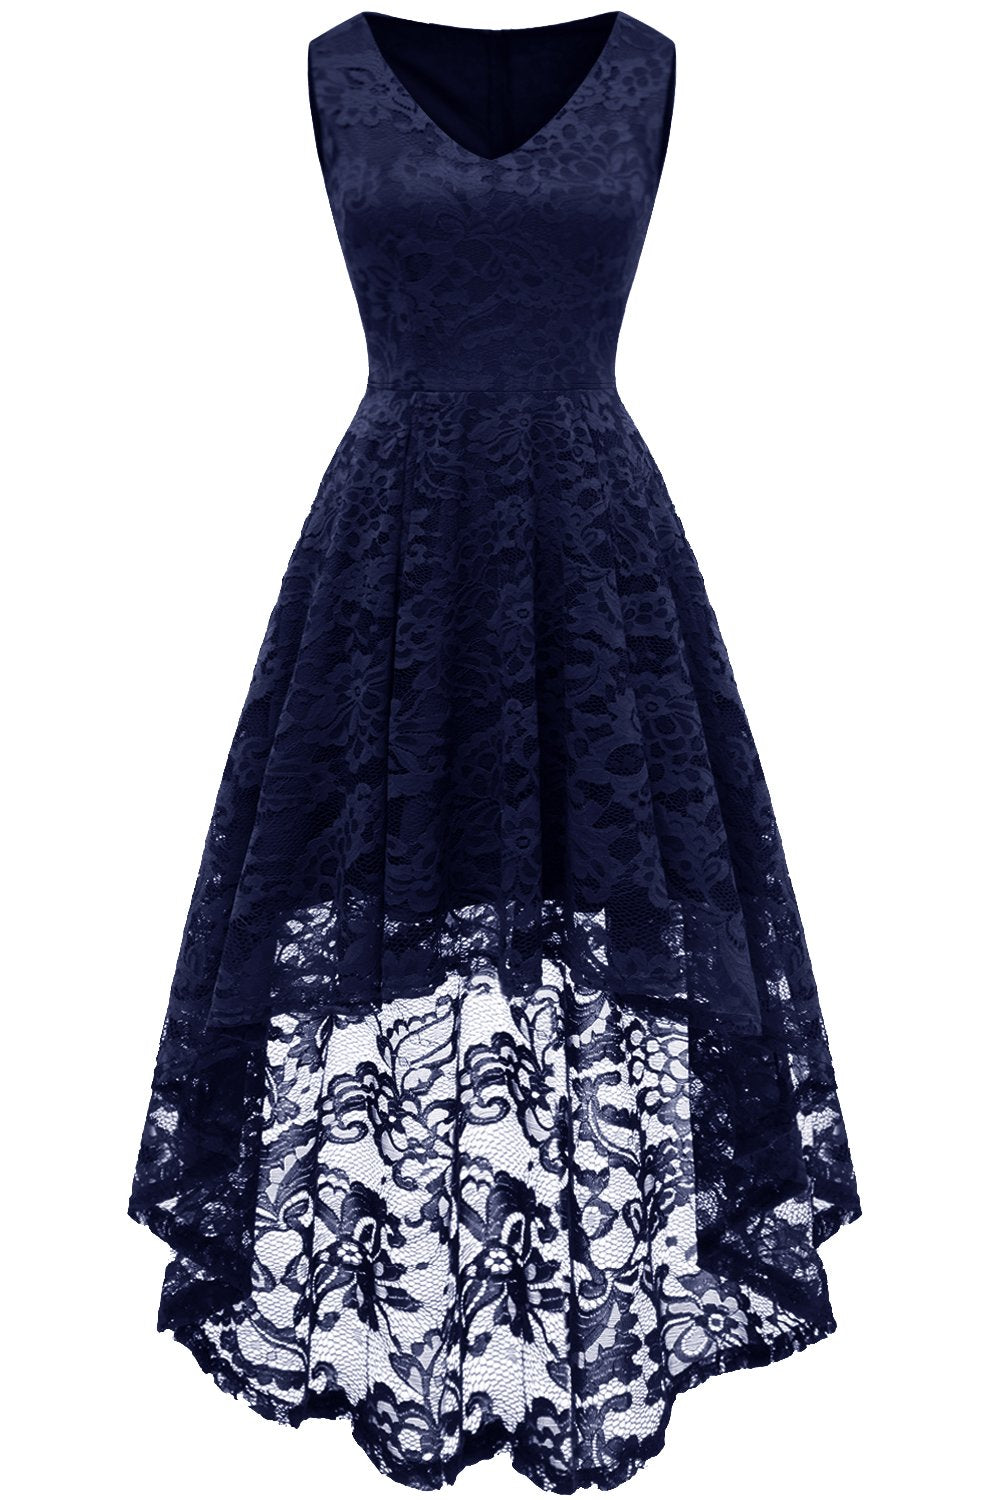 Navy Lace Bridesmaid Party Dress